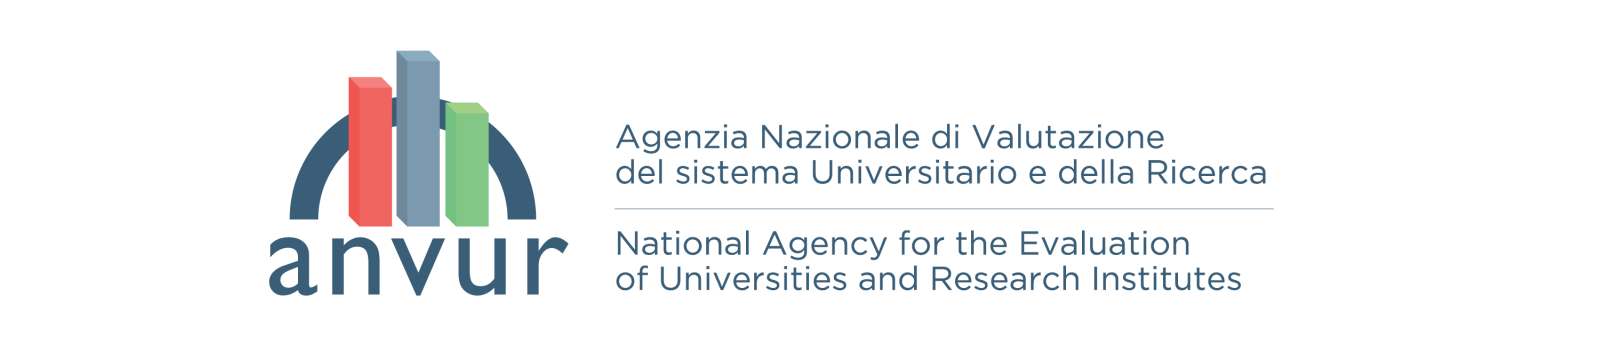 Towards reforming the research assessment system in Italy